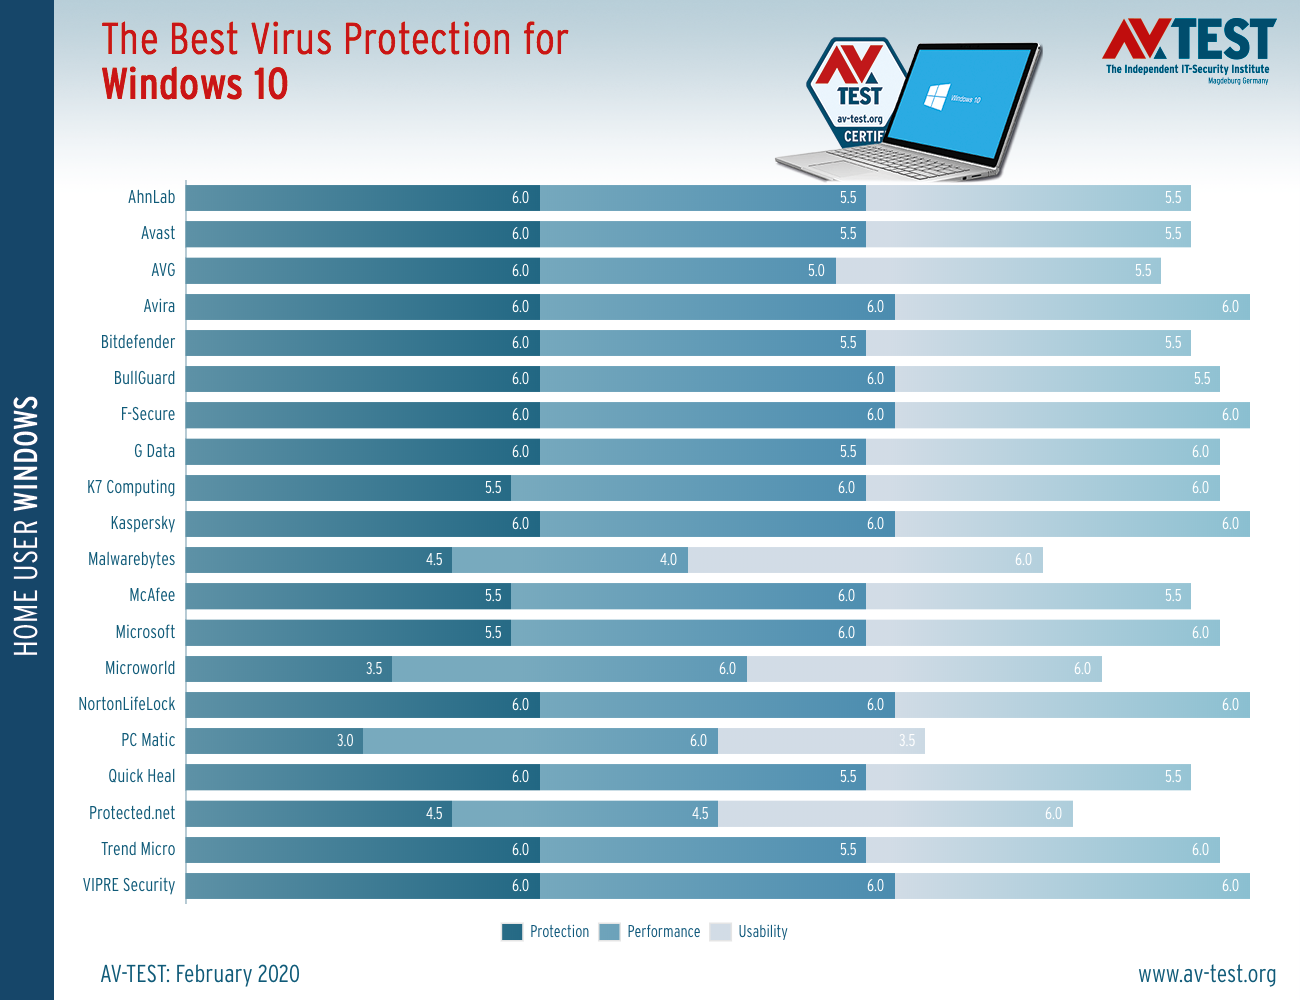 The best Virus Protection for Windows 10